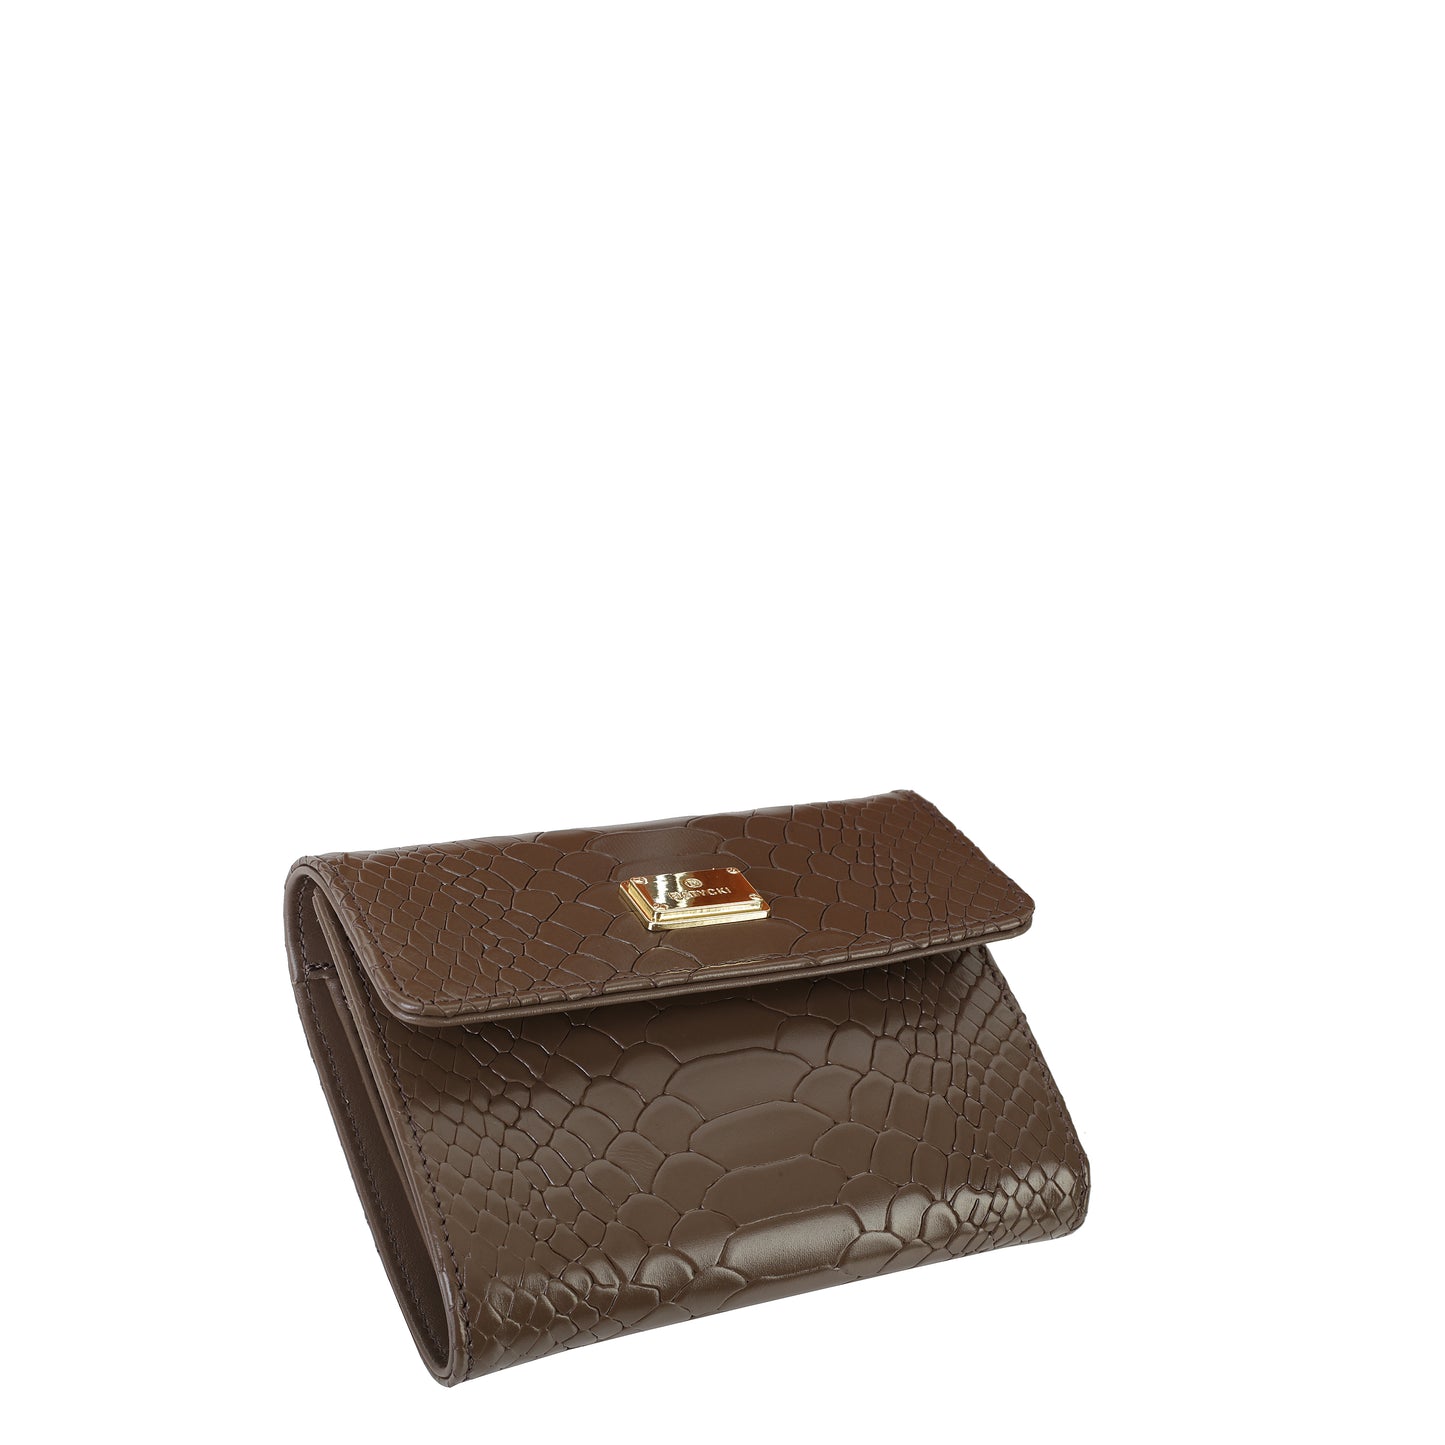 MOCCA women's leather wallet